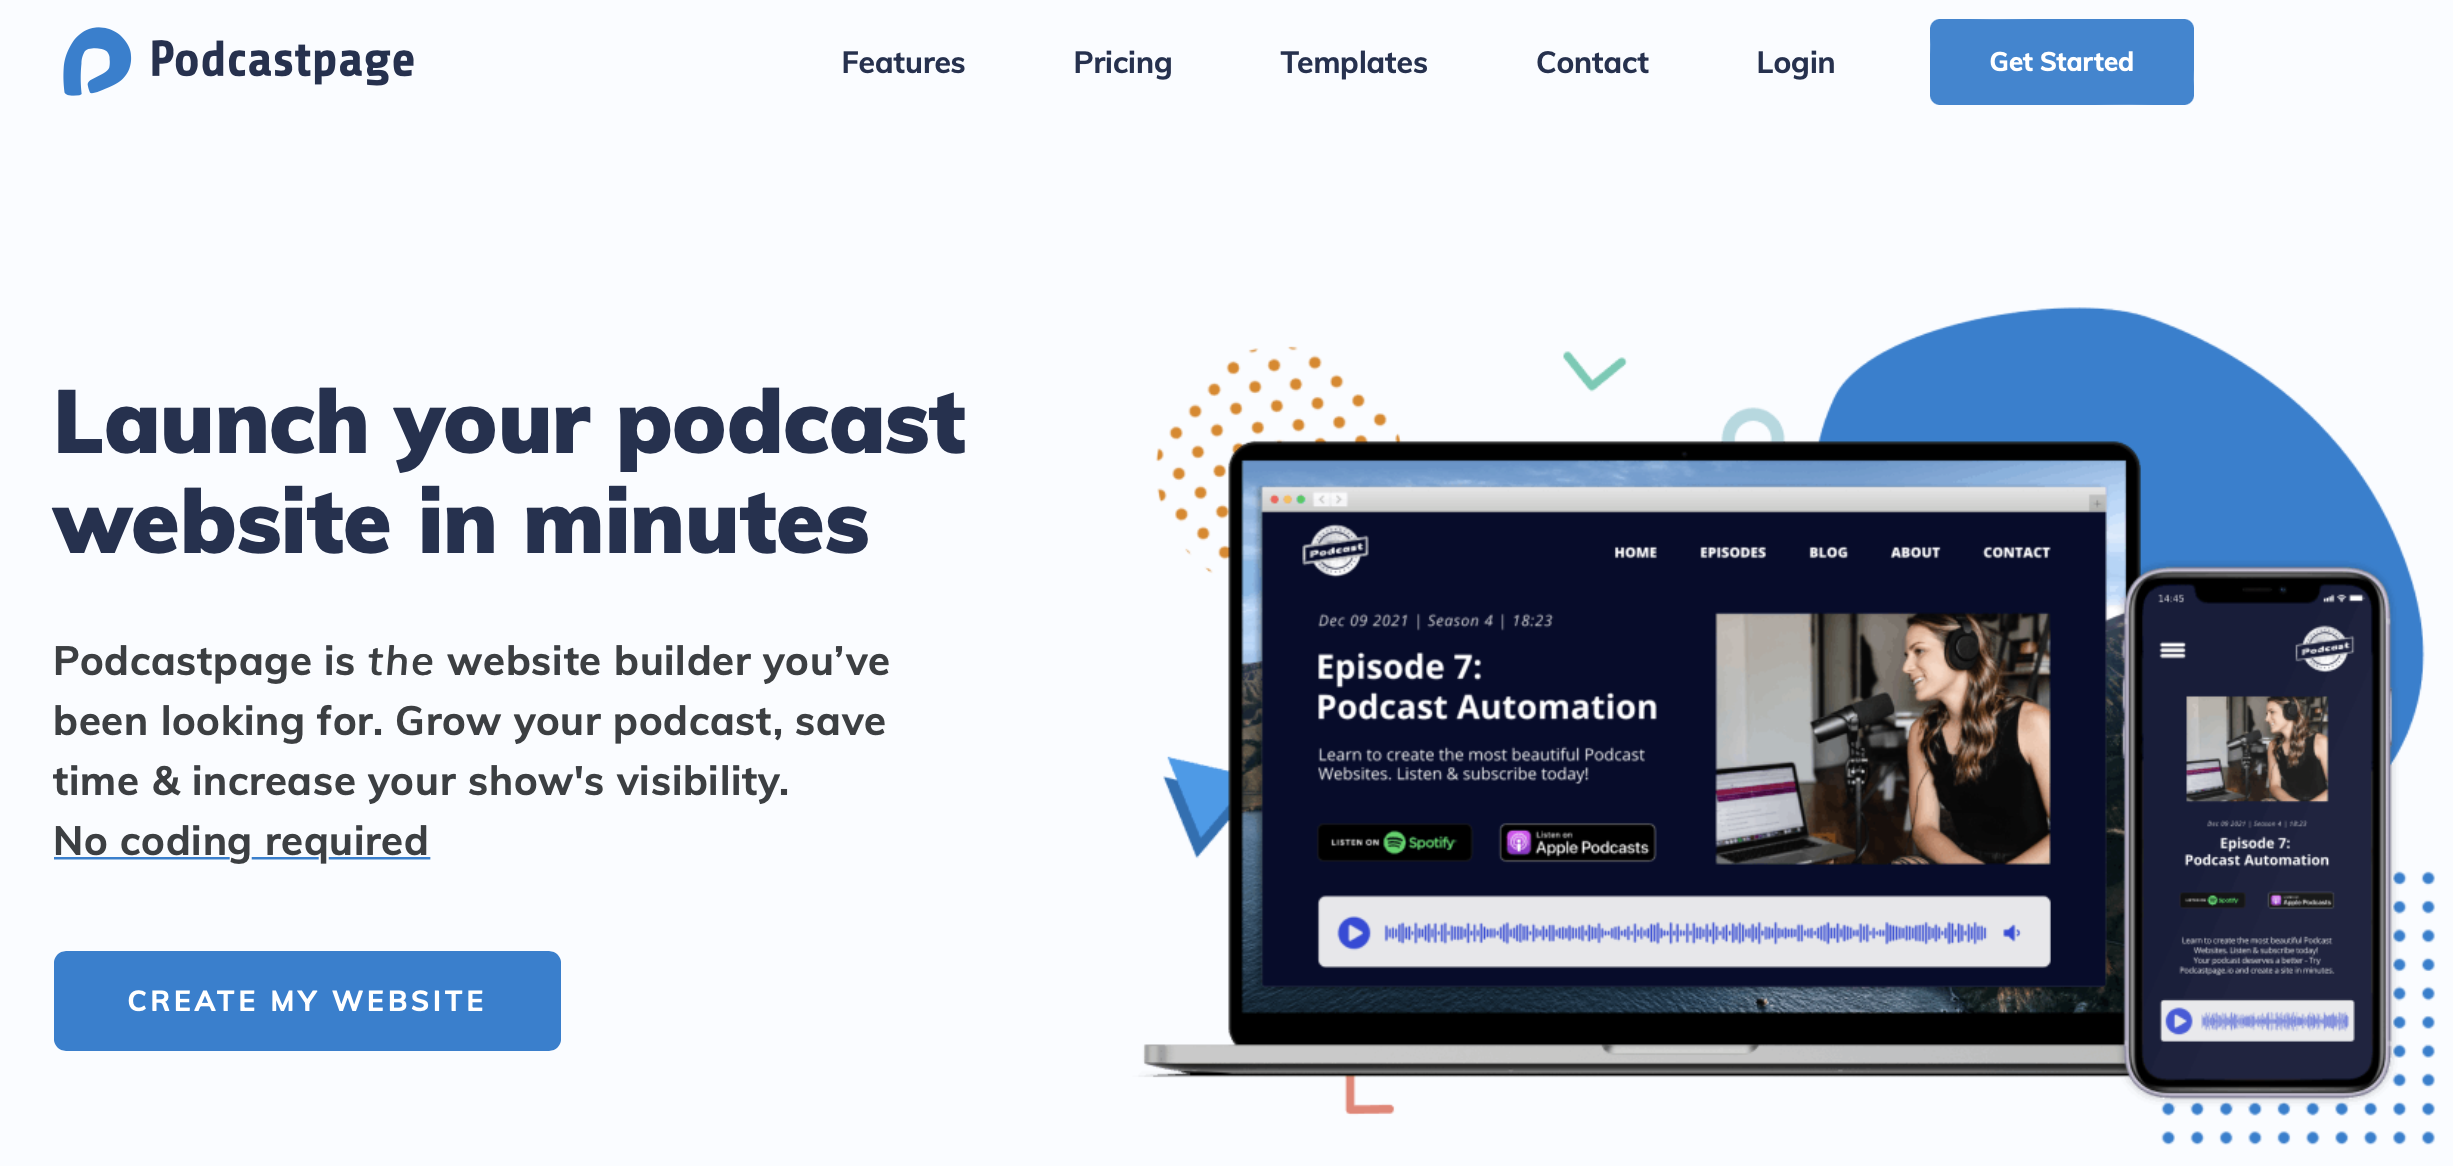 How to create a blog and podcast with Podcastpage